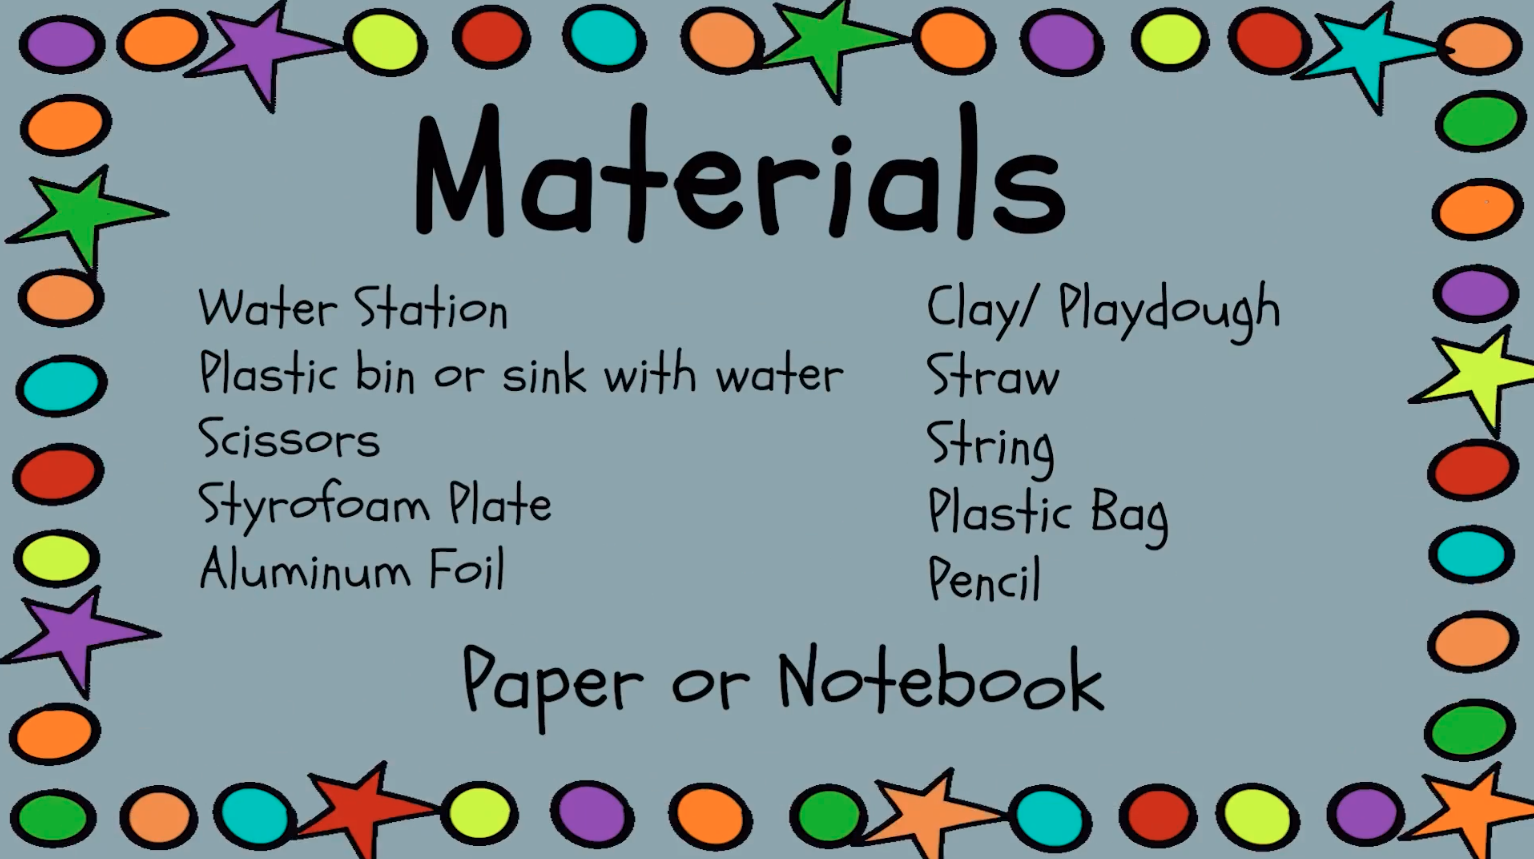 Materials list: Water station, plastic bin or sink with water, scissors, styrofoam plate, aluminum foil, clay/playdough, straw, string, plastic bag, pencil, paper or notebook